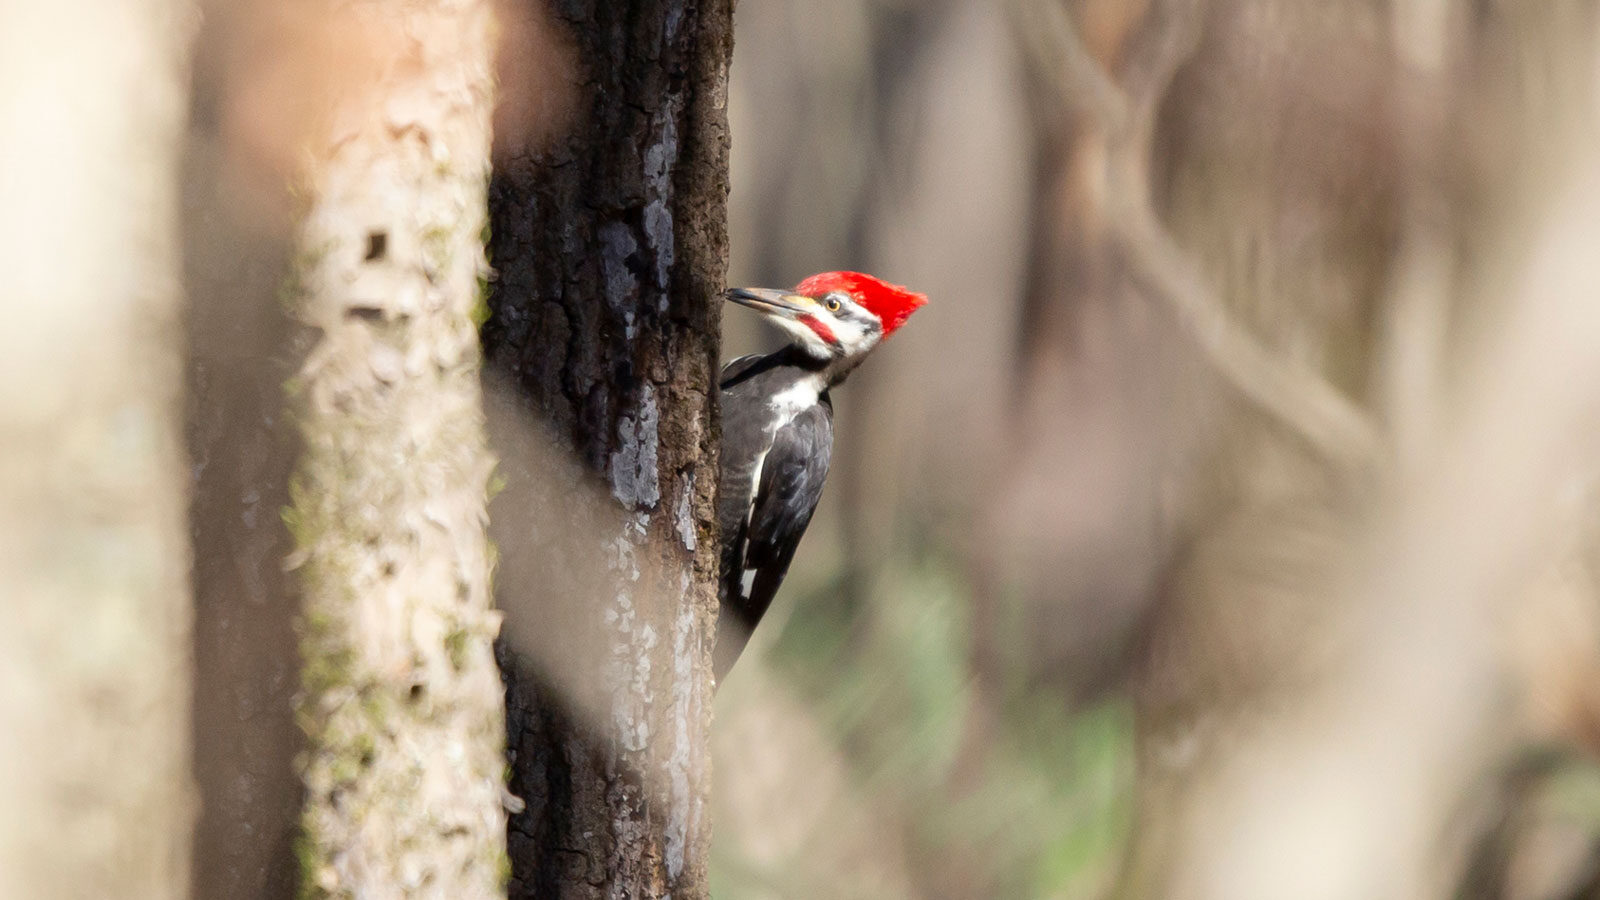 Male pileated woodpecker foraging on a tree trunk